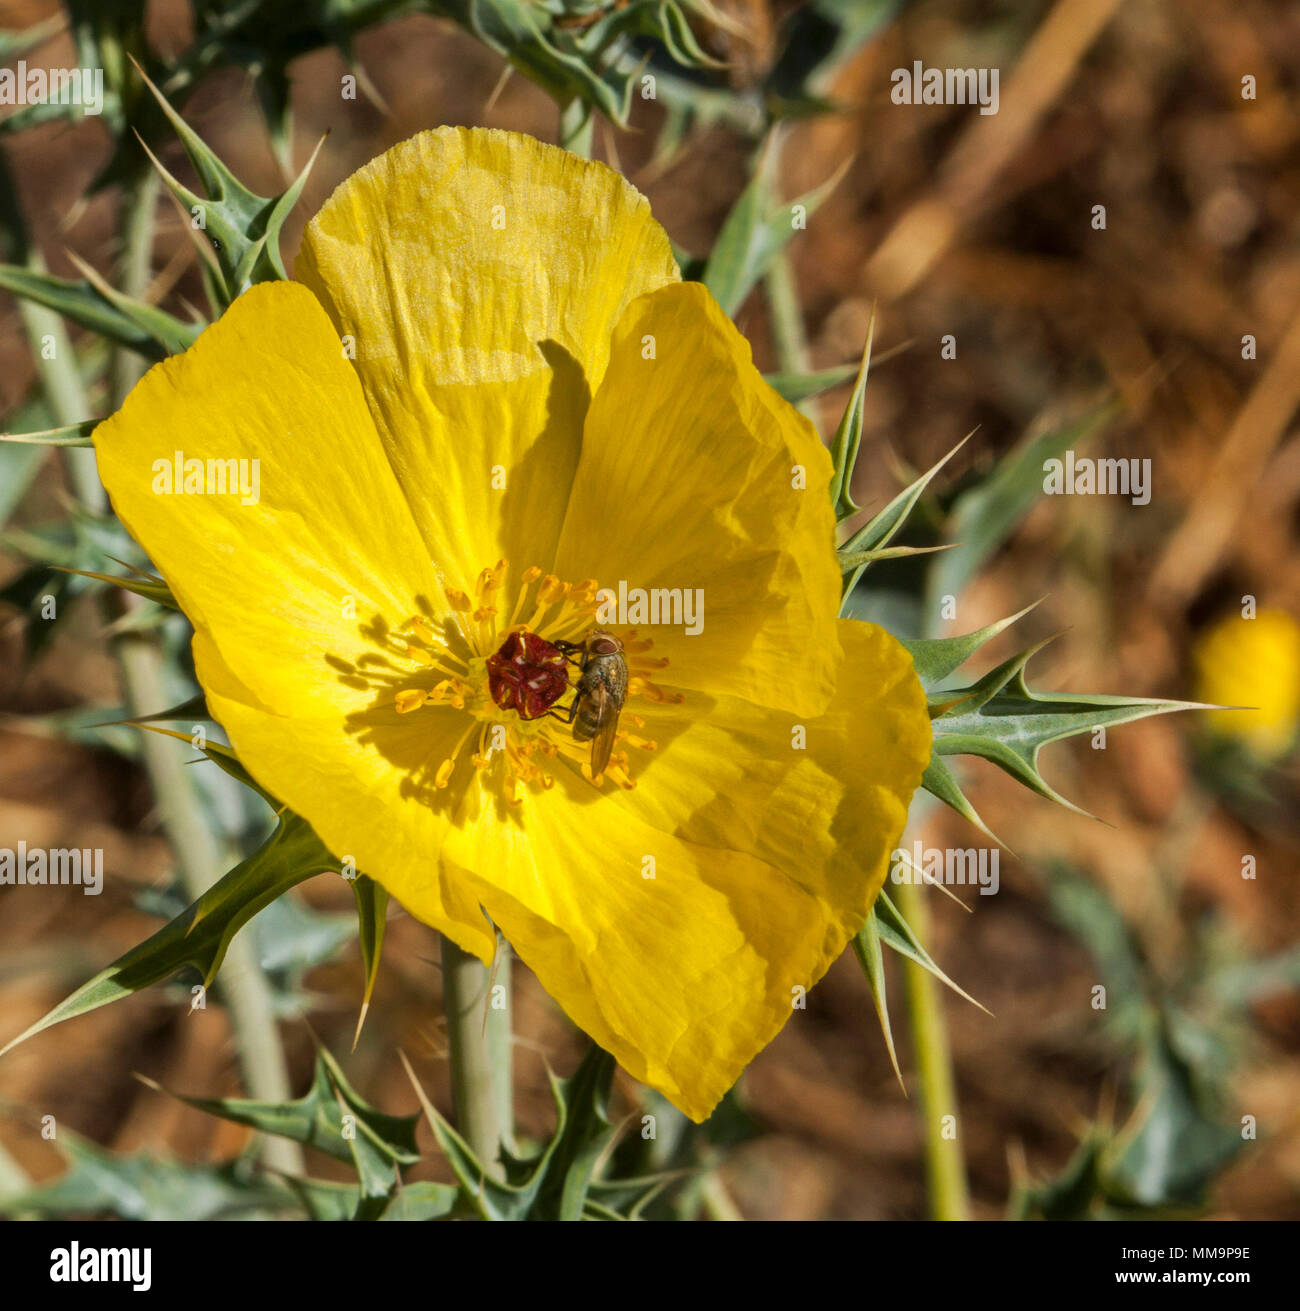 Vivid yellow flower and foliage of Argemone mexicana, Mexican prickly poppy, with a fly pollinating this Australian weed species Stock Photo